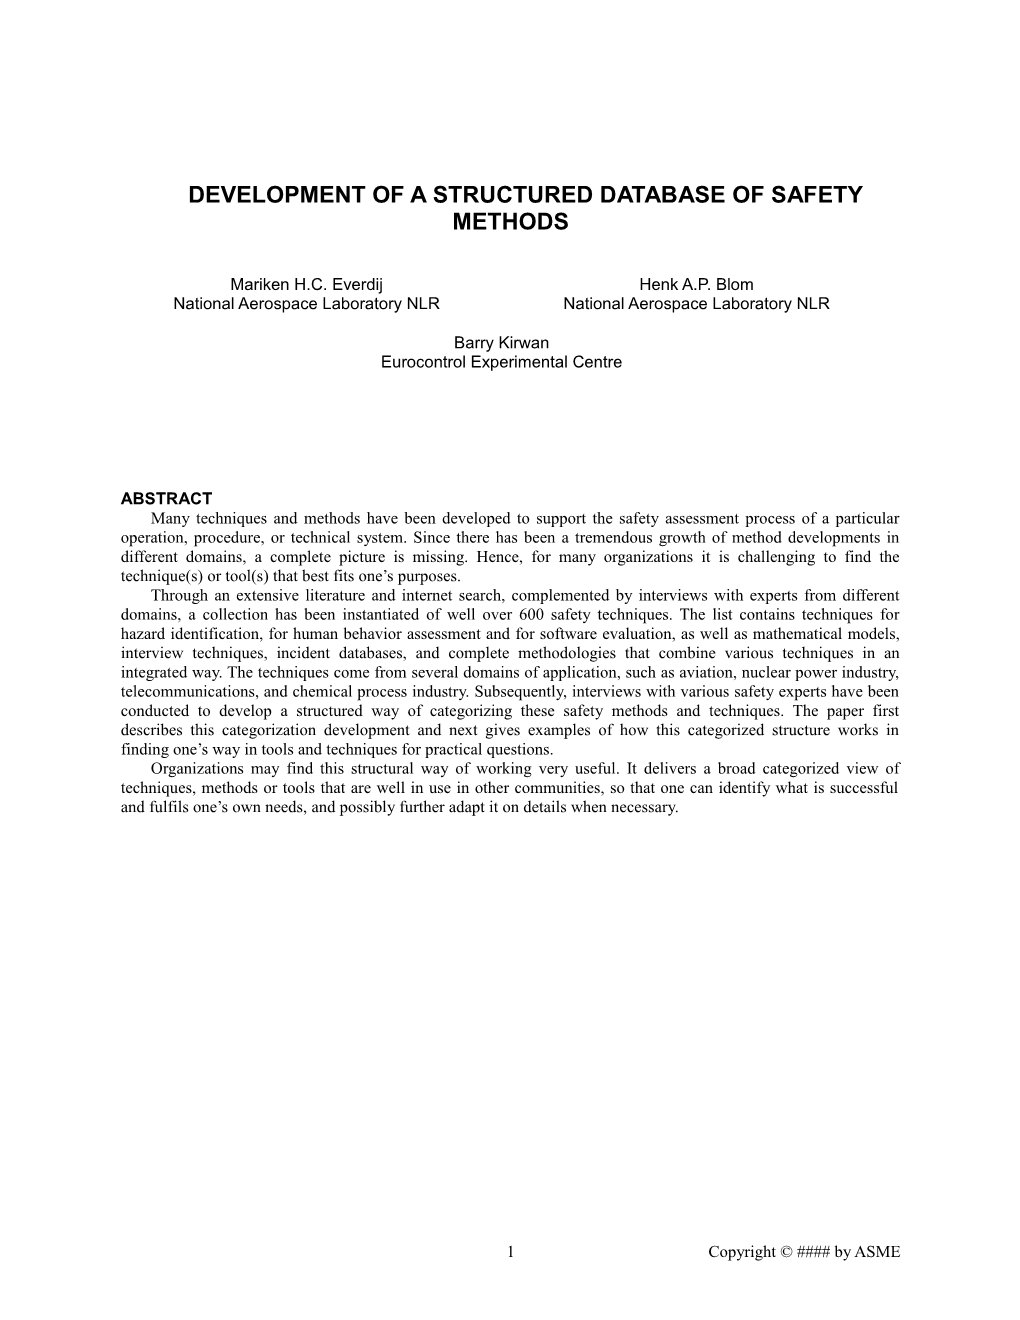 Development of a Structured Database of Safety Techniques Database , Methods with Applications